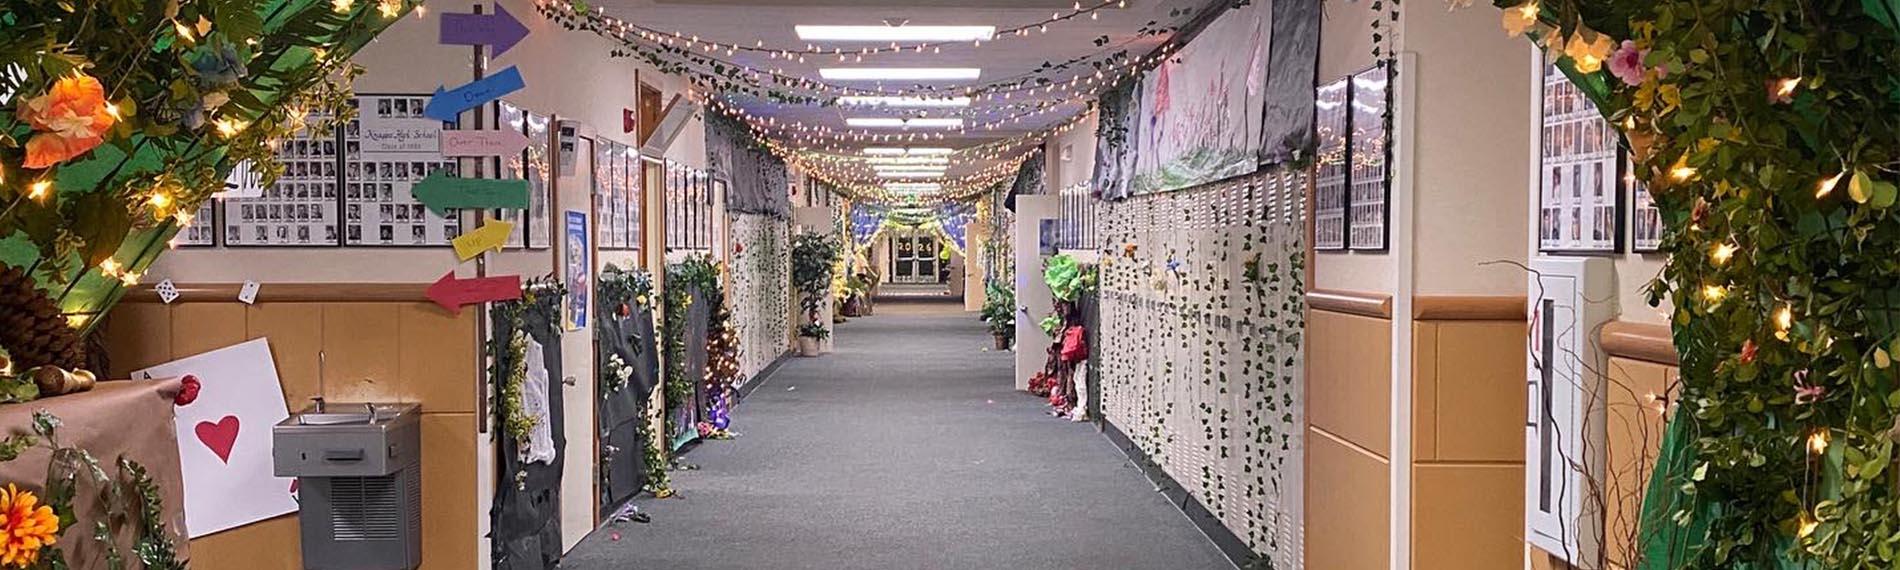 Homecoming enchanted forest hallway decorations